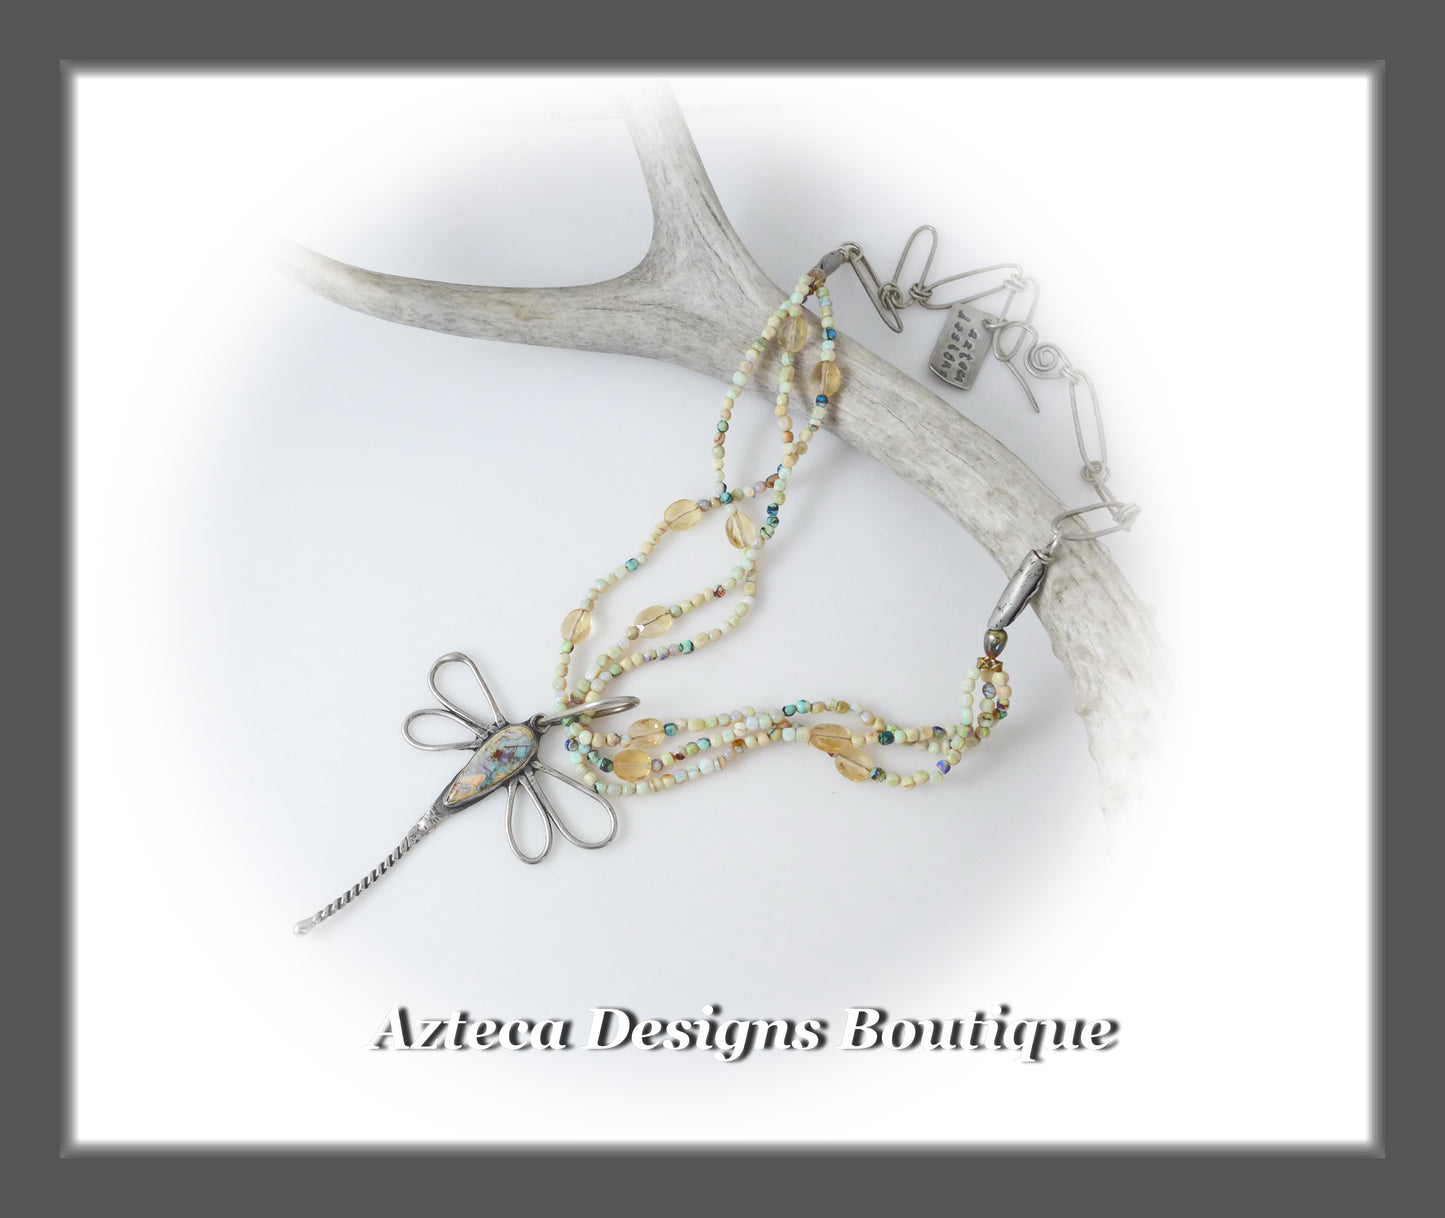 She Flies~ Dragonfly+Cultured Sterling Opal+Citrine+Hand Fabricated Silver Layered Necklace